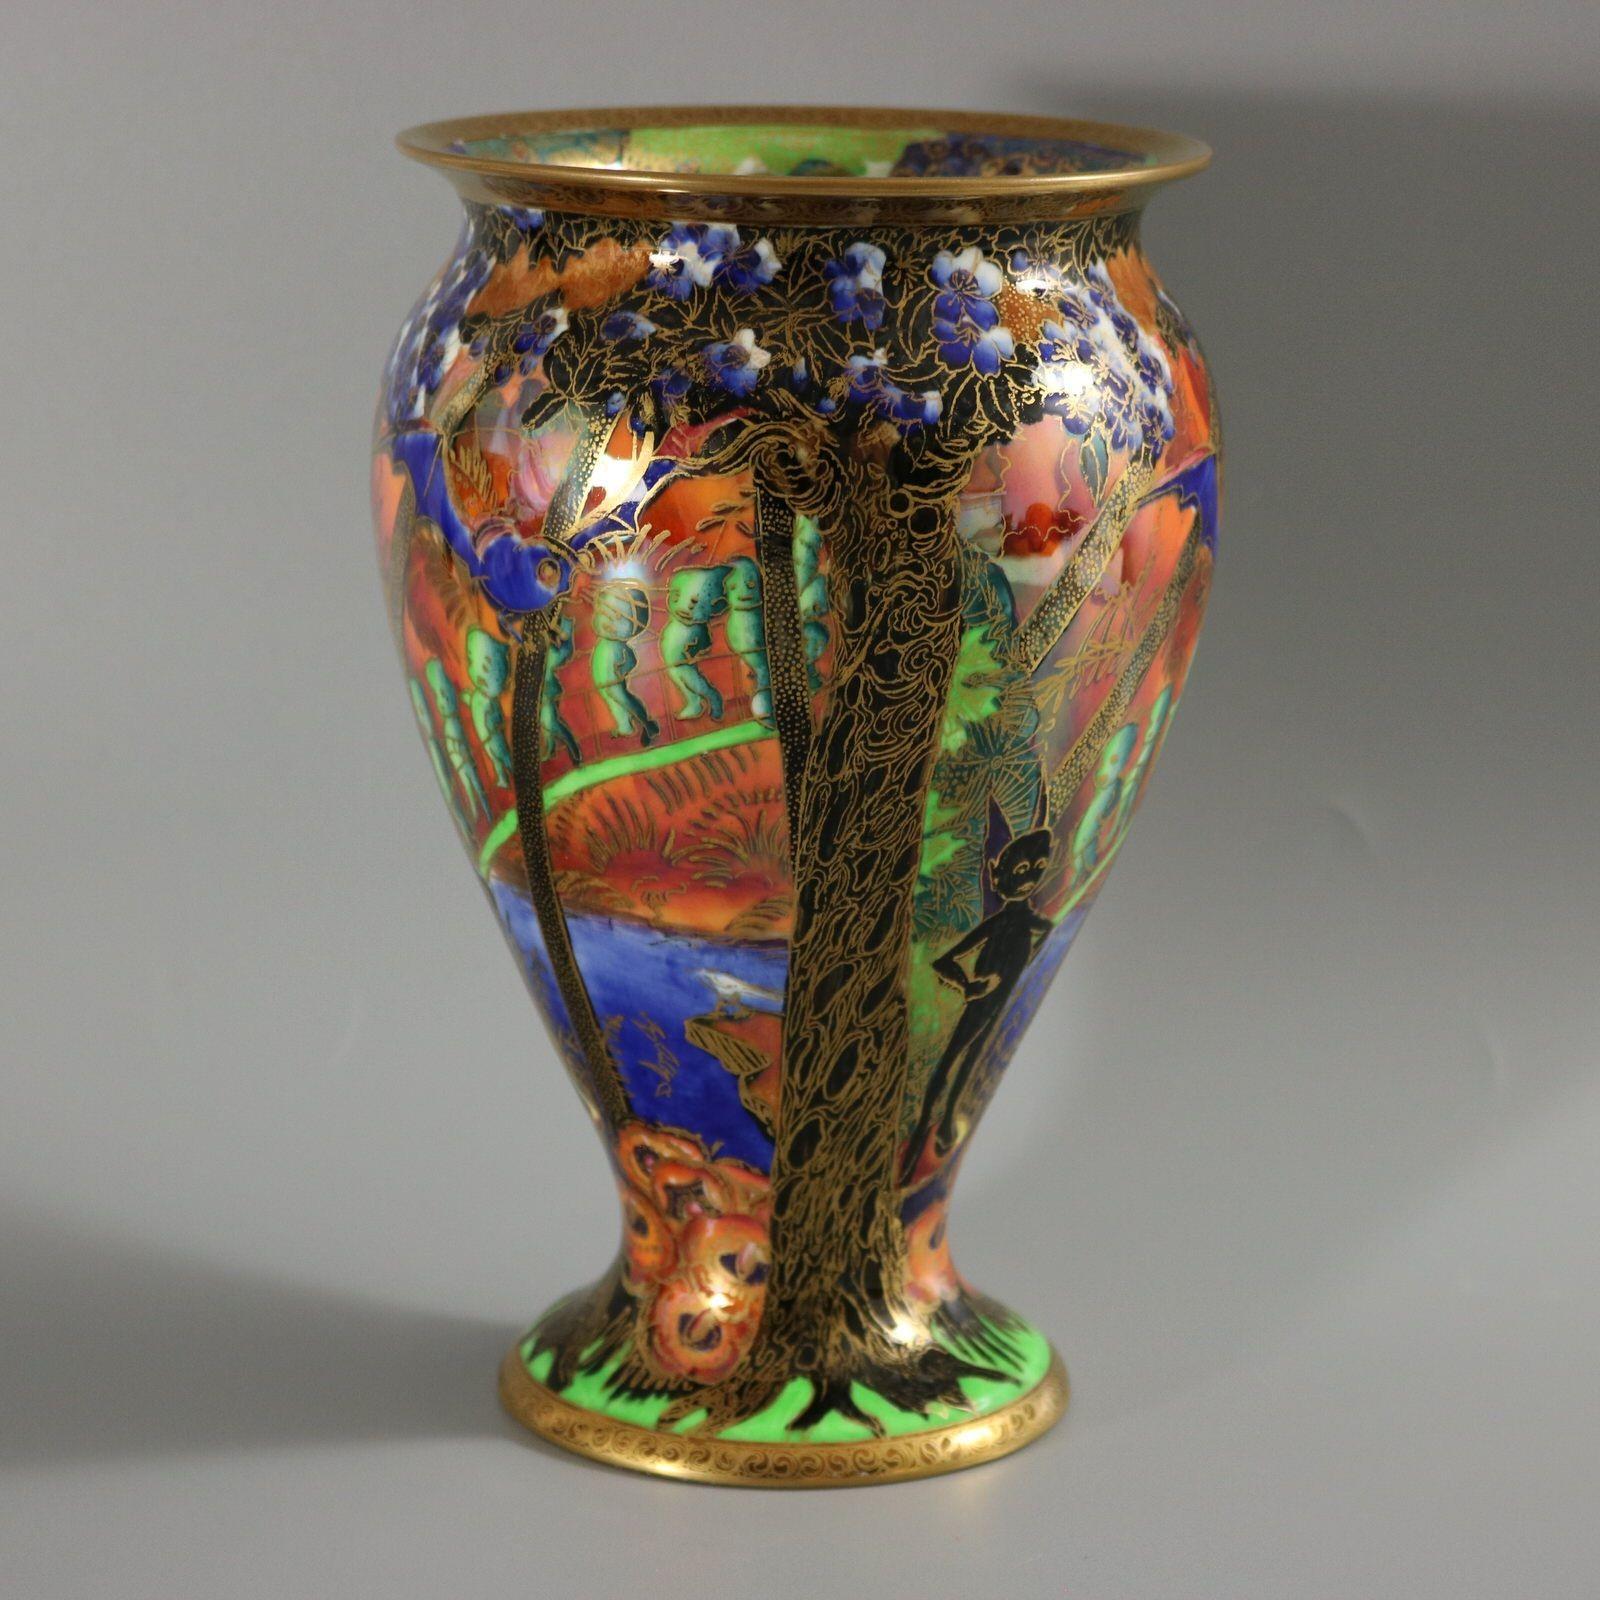 Wedgwood Fairyland Lustre vase decorated in the Imps on a bridge pattern. This pattern features a line of imps crossing a bridge. A bird sits on the shoreline of a lake below the bridge. Above the bridge is a Roc bird in flight. A 'Bubble' boy